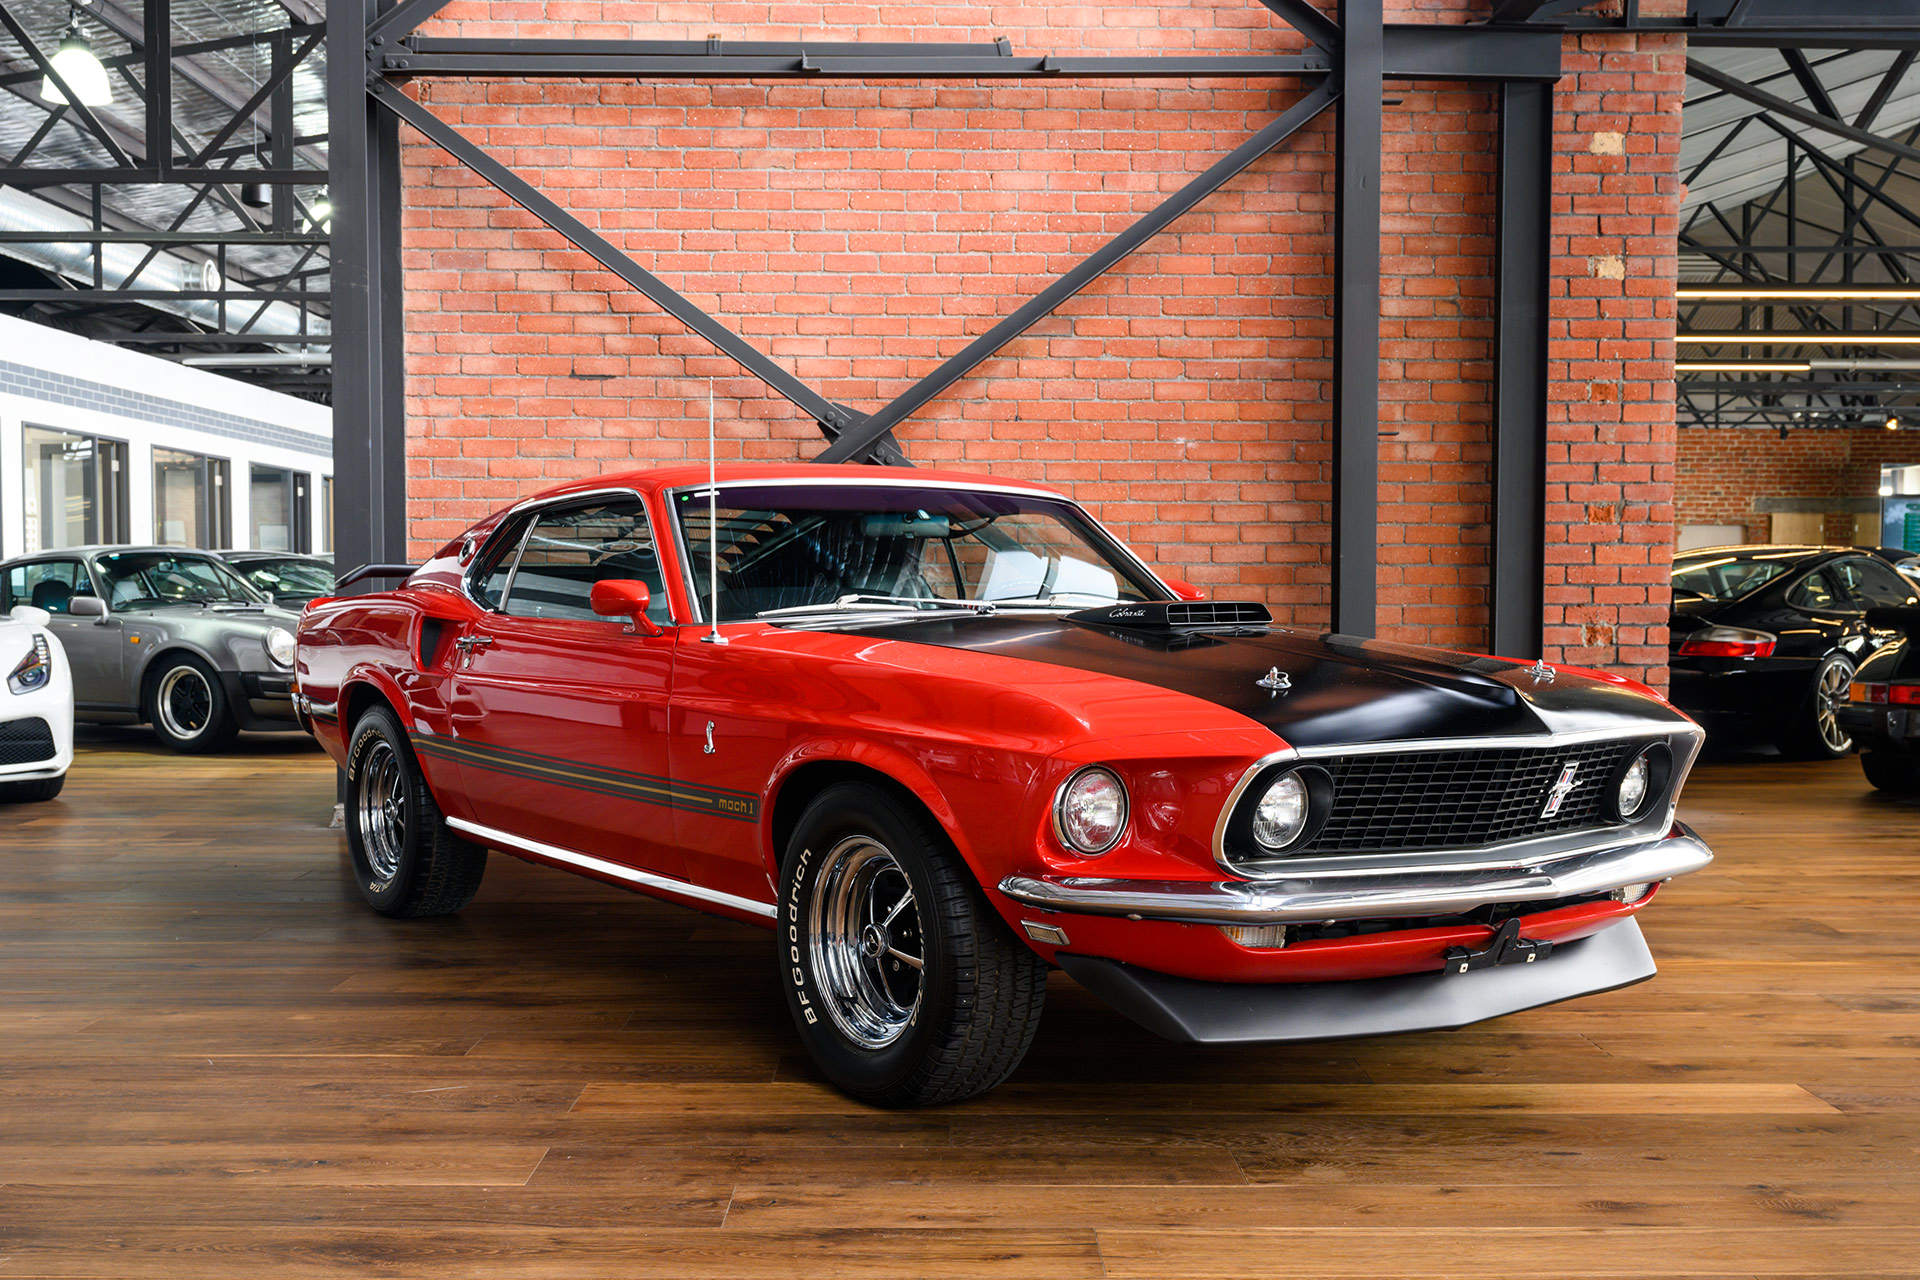 1969 Ford Mustang Mach I 428 Coupe Blueprints Free Outlines | Images ...